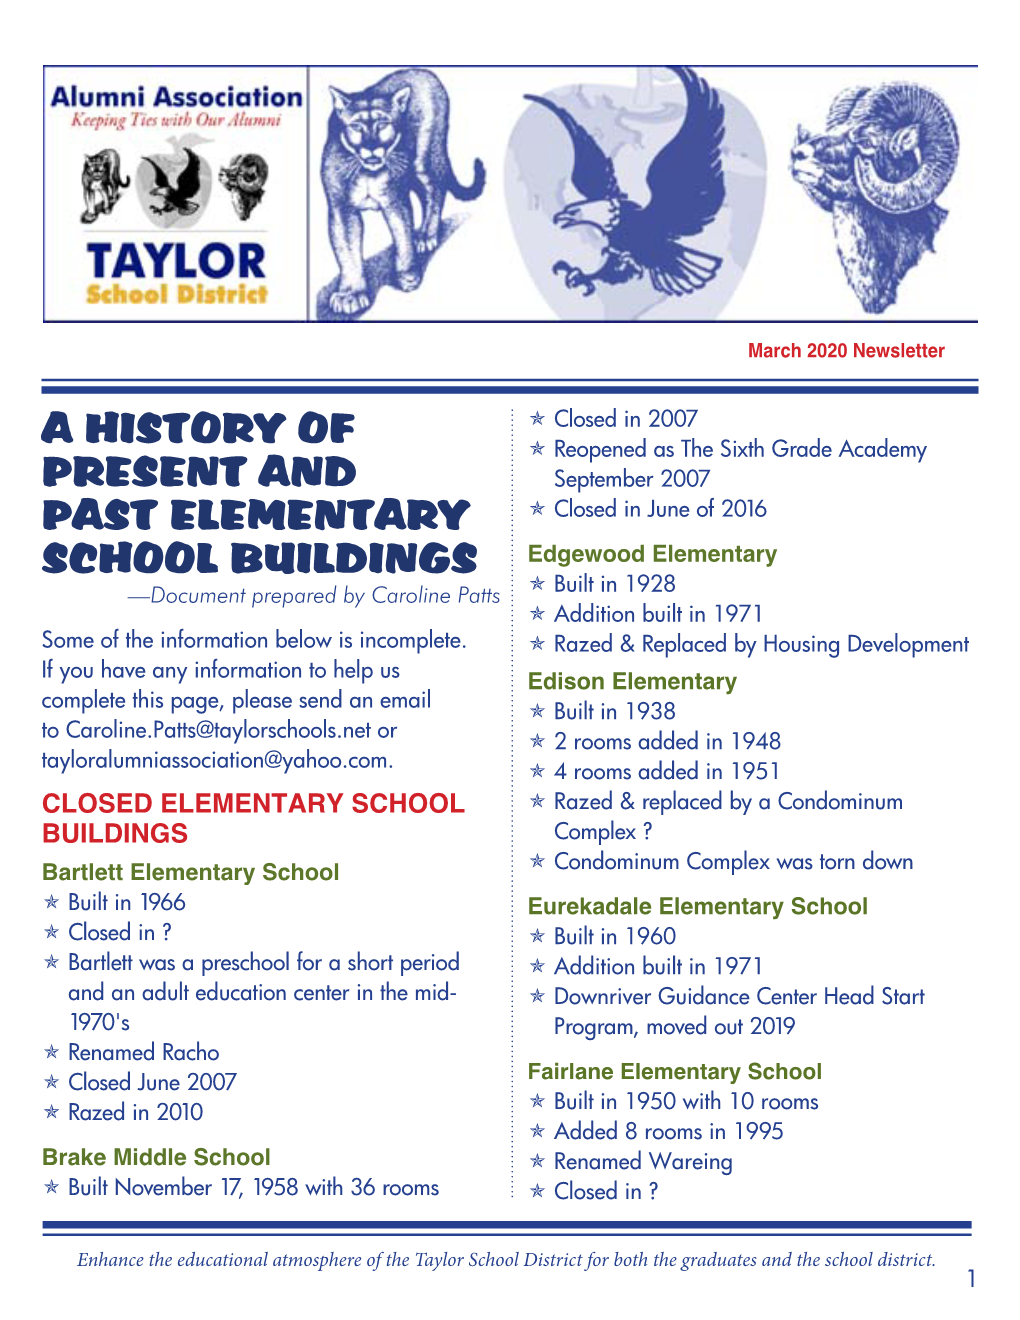 A History of Present and Past Elementary School Buildings